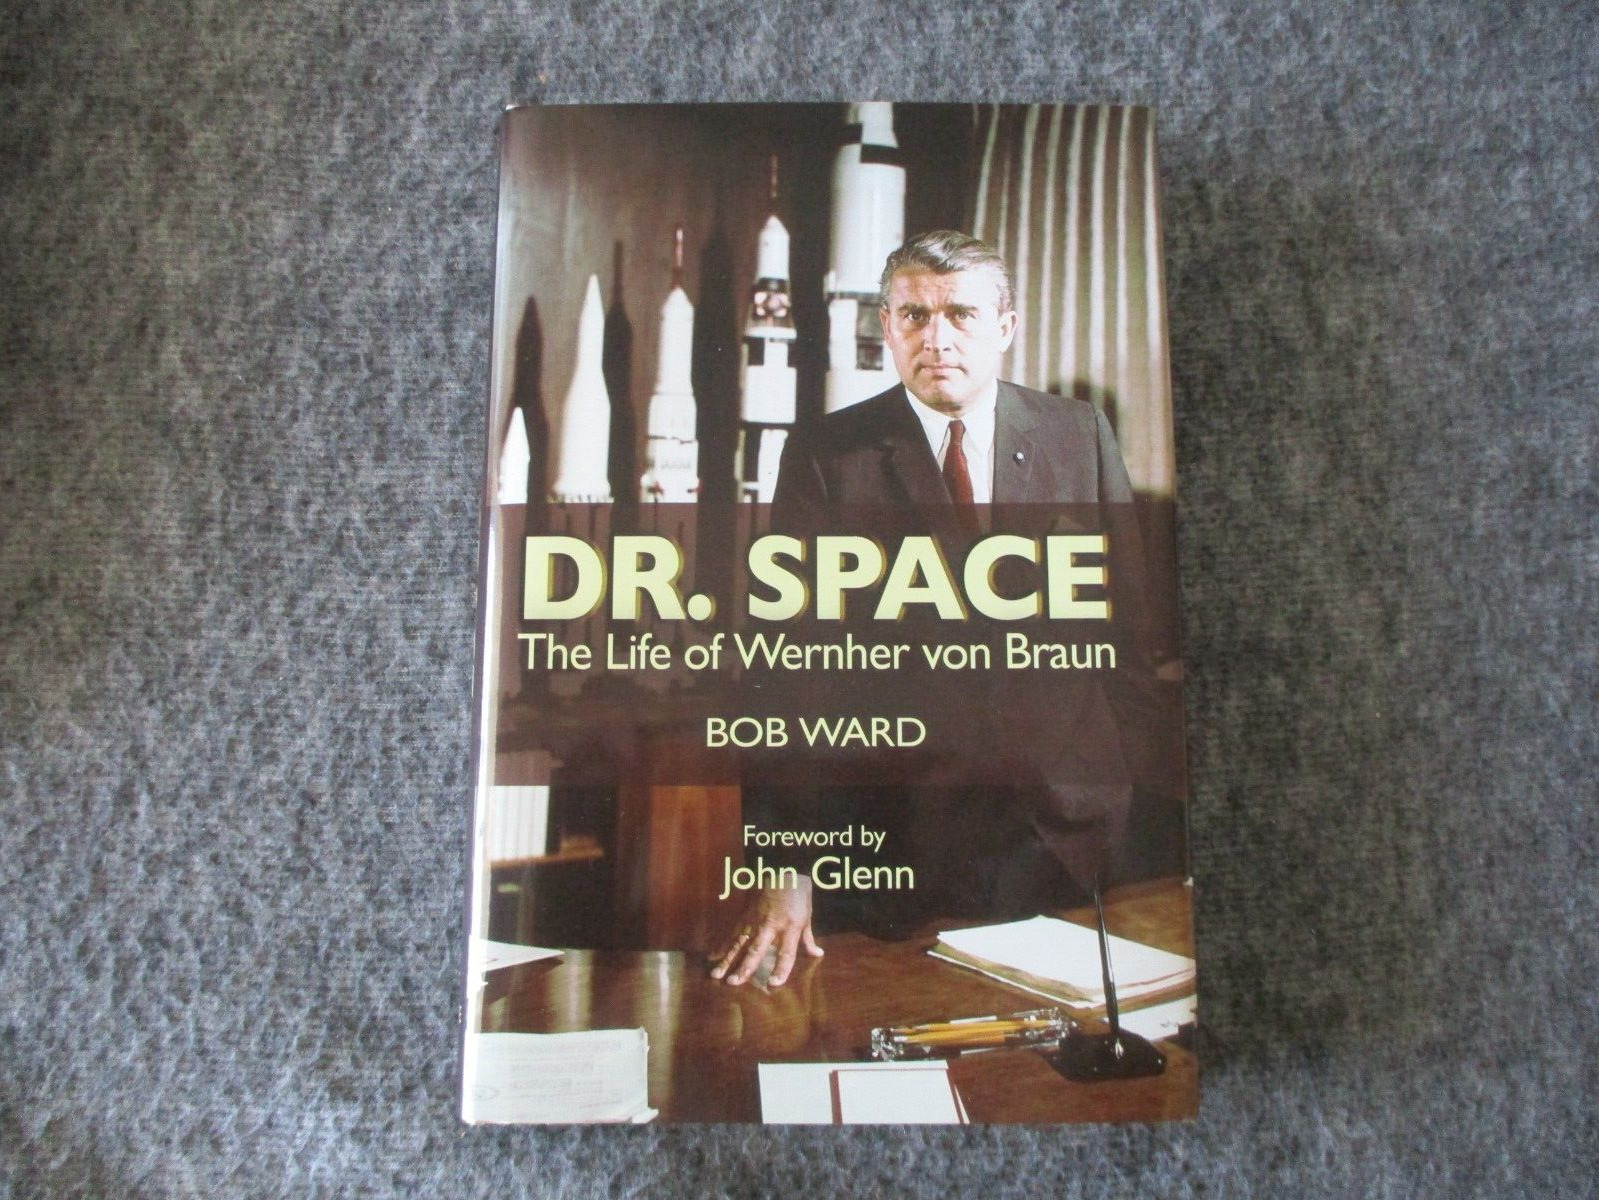 DR. SPACE THE LIFE OF WERNHER VON BRAUN HARDCOVER - STUHLINGER & AUTHOR SIGNED